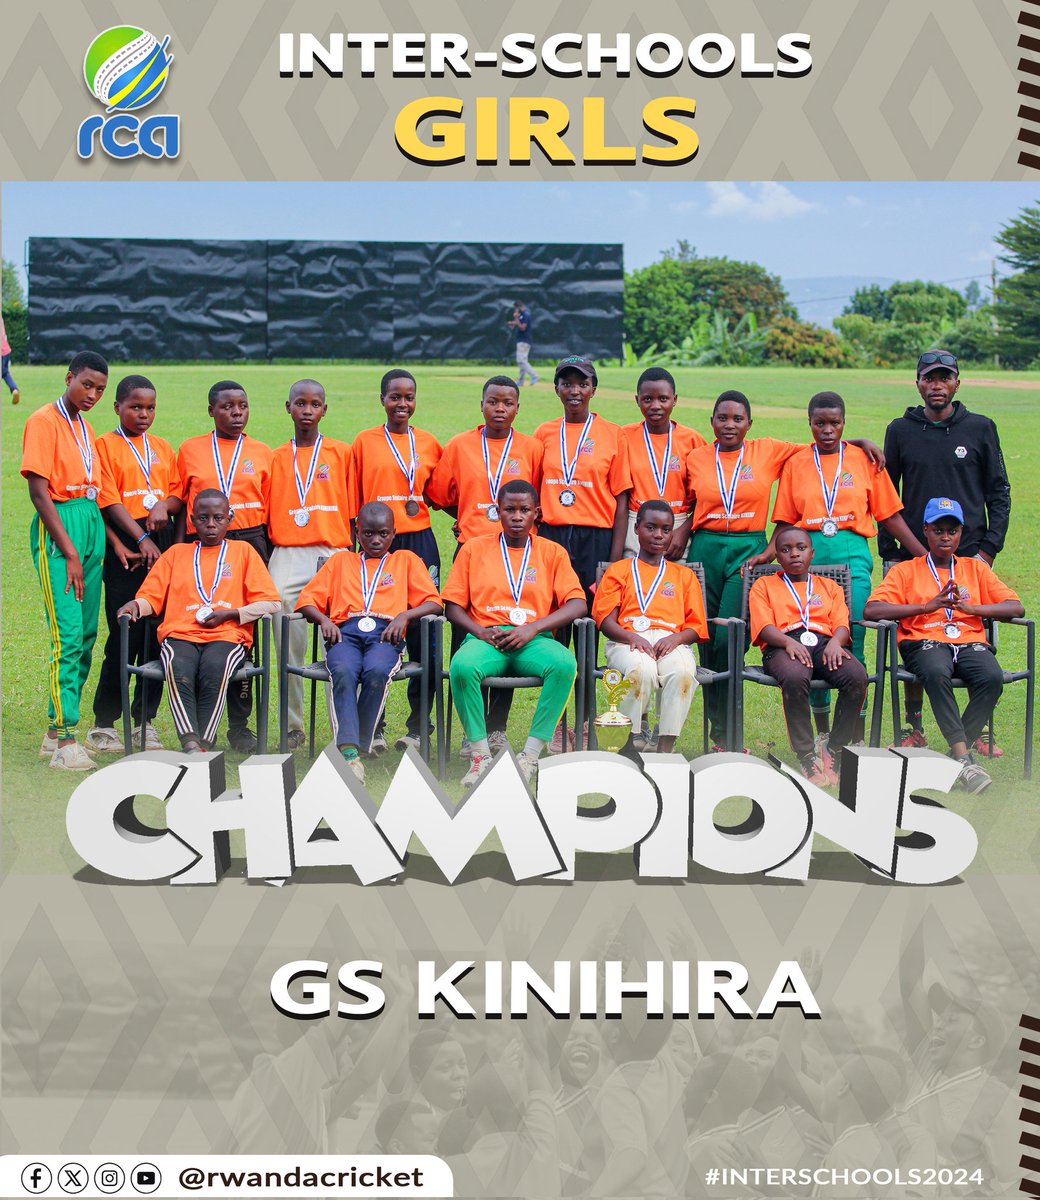 GS Kinihira from Rulindo was crowned the inter schools girls tournament after defeating GS Cyimbazi from Rwamagana by 10 runs .